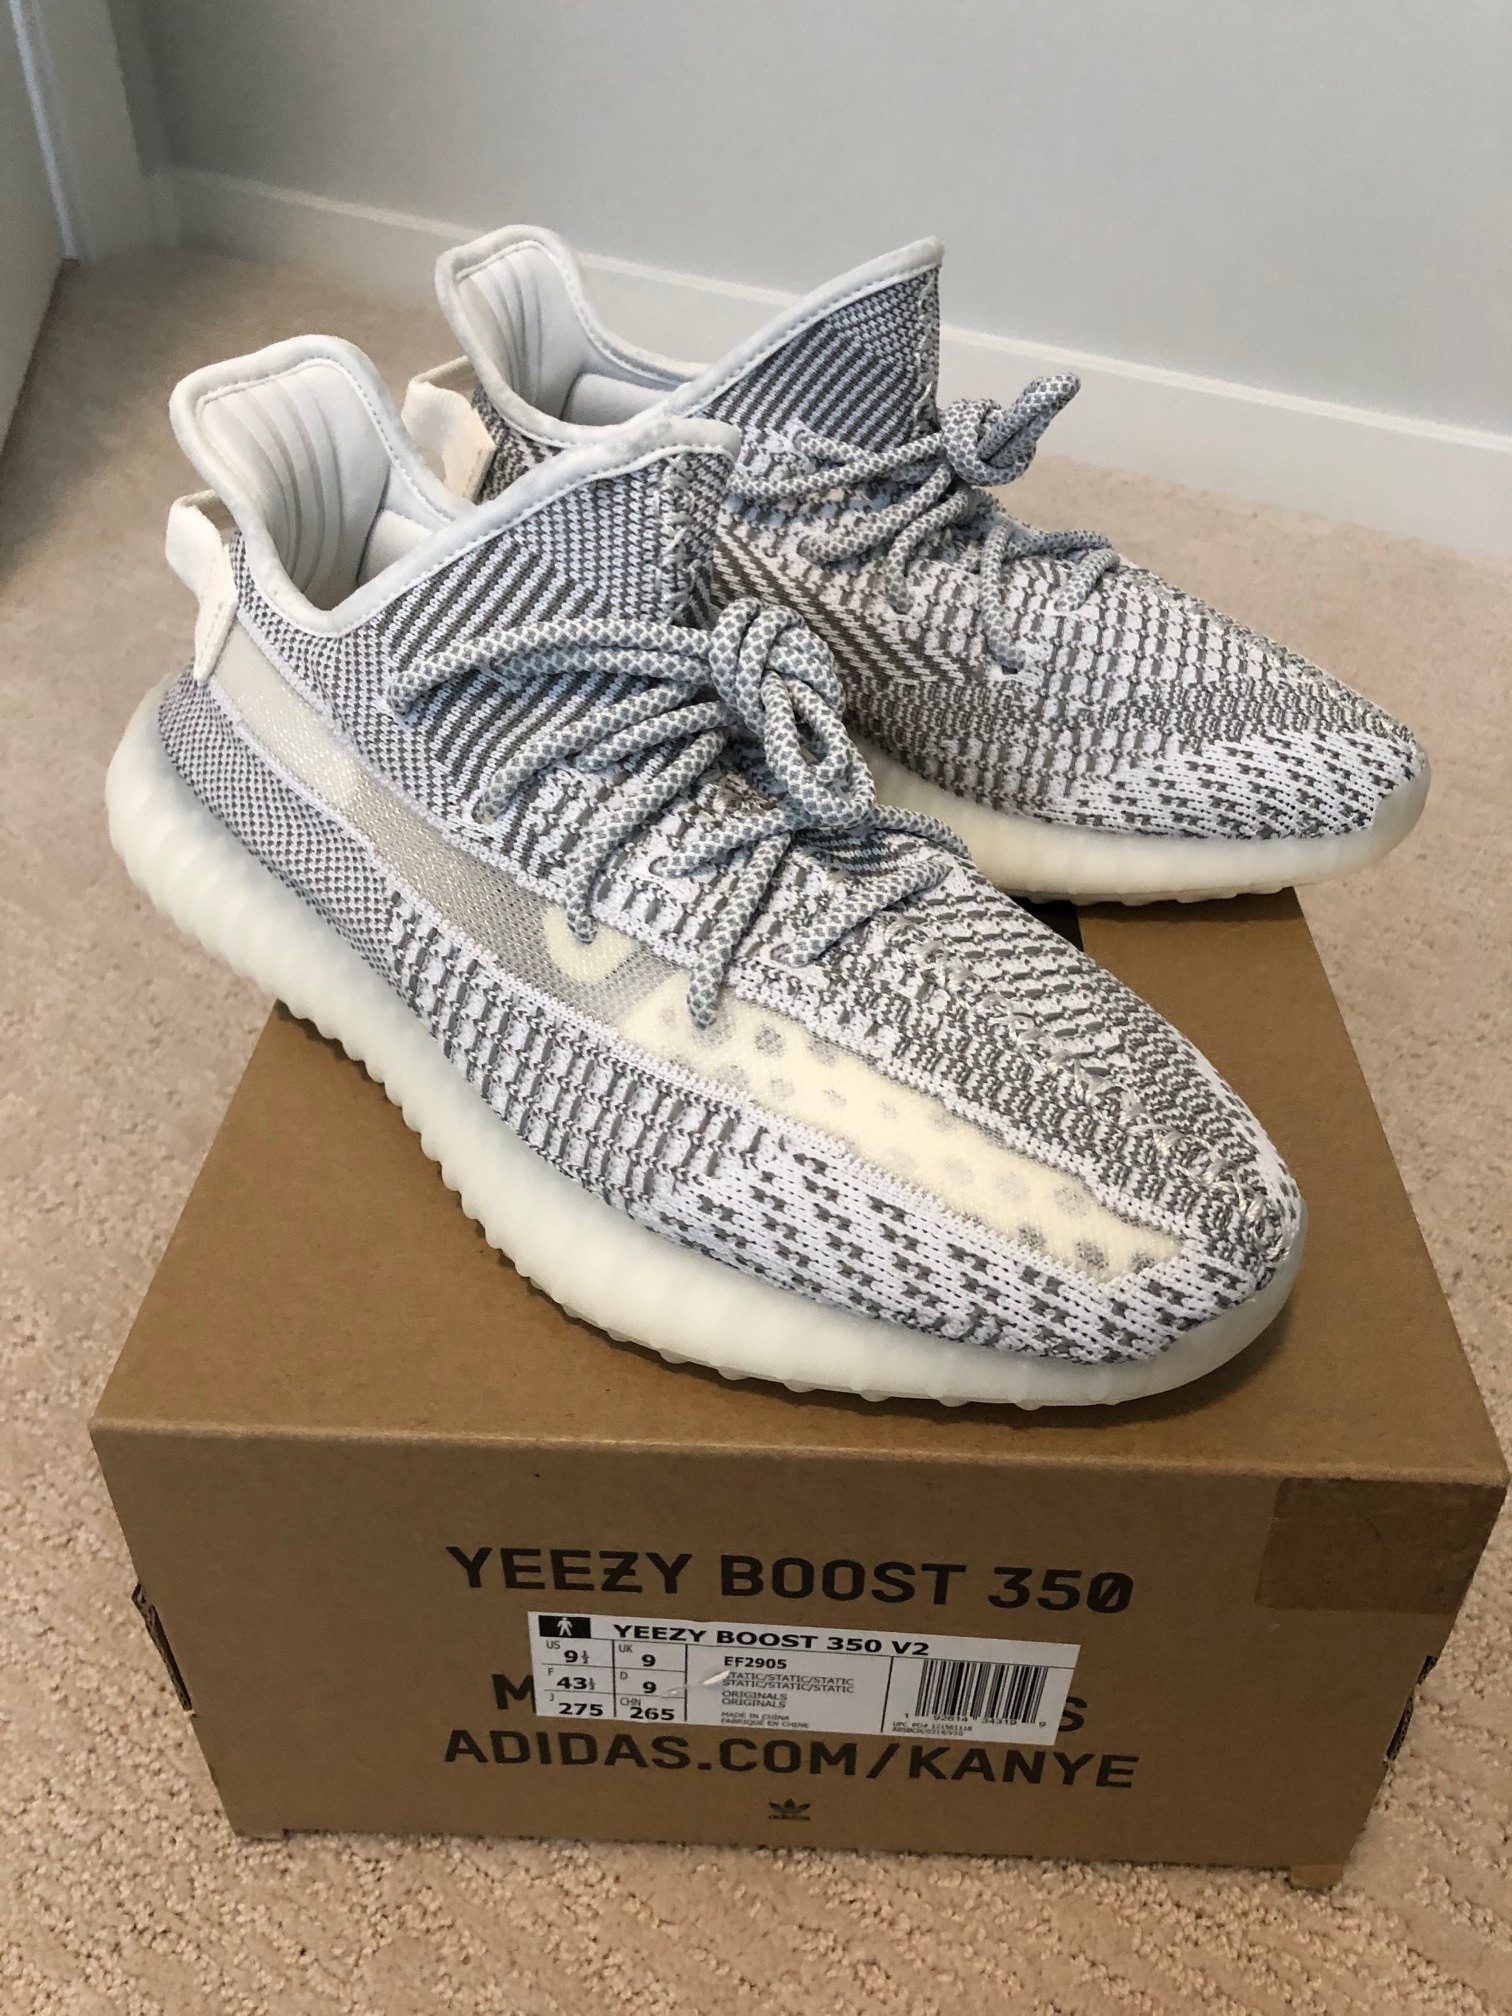 Men's Adidas Yeezy Boost 350 V2 Static Sneaker Shoes SZ 9.5 - Lust4Labels